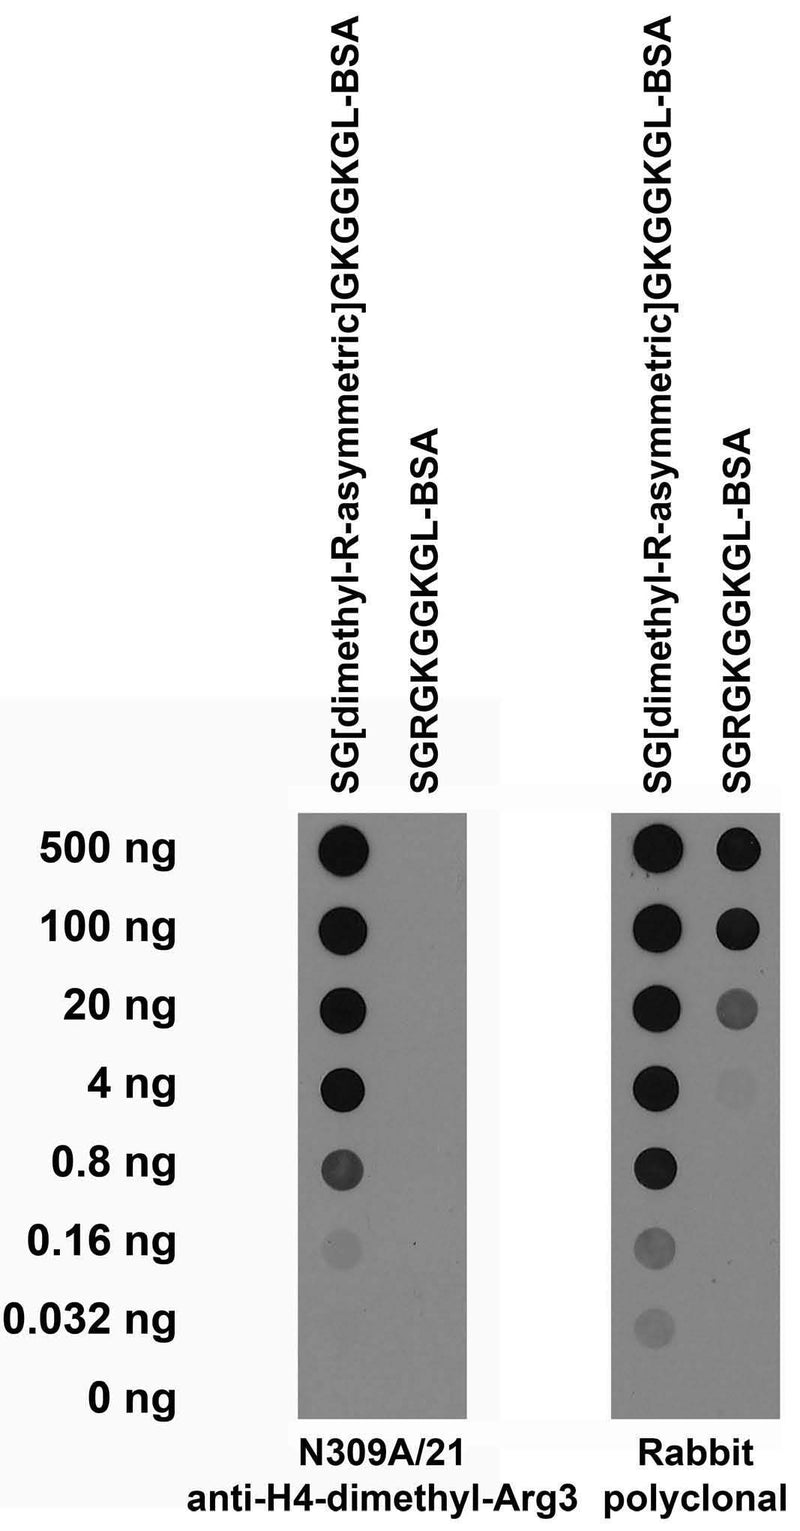 Serial dilutions of BSA-conjugated modified and unmodified peptides dotted onto membrane and probed with N309A/21 TC supe (left) and a rabbit polyclonal antibody control (right).